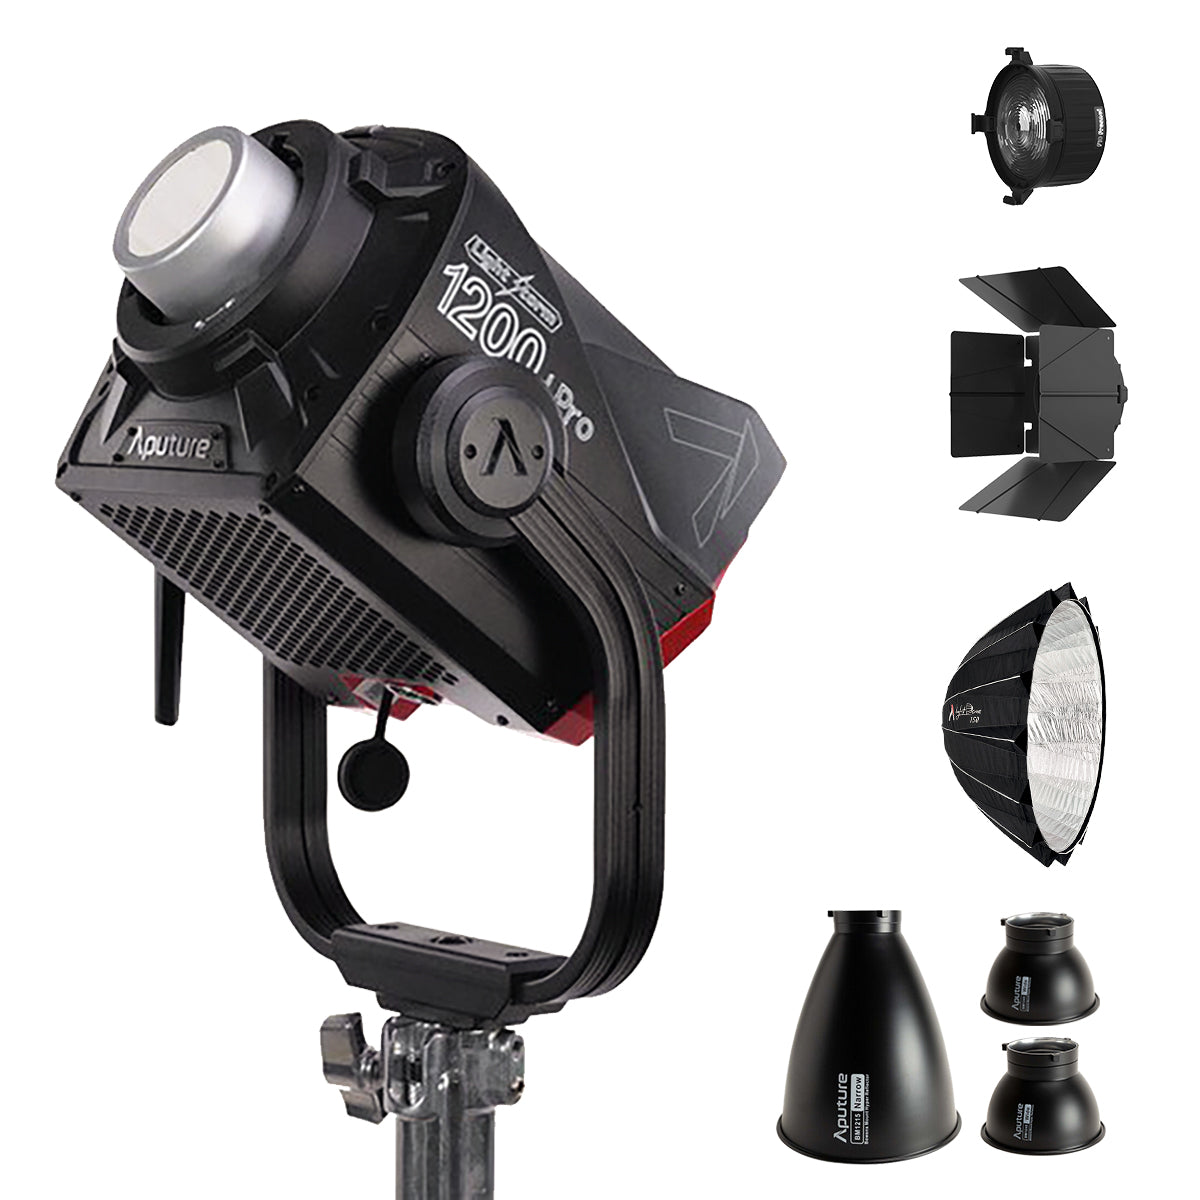 Aputure LS 1200d Pro Set with Light Dome 150 Softbox, F10 Barndoors and F10 Fresnel